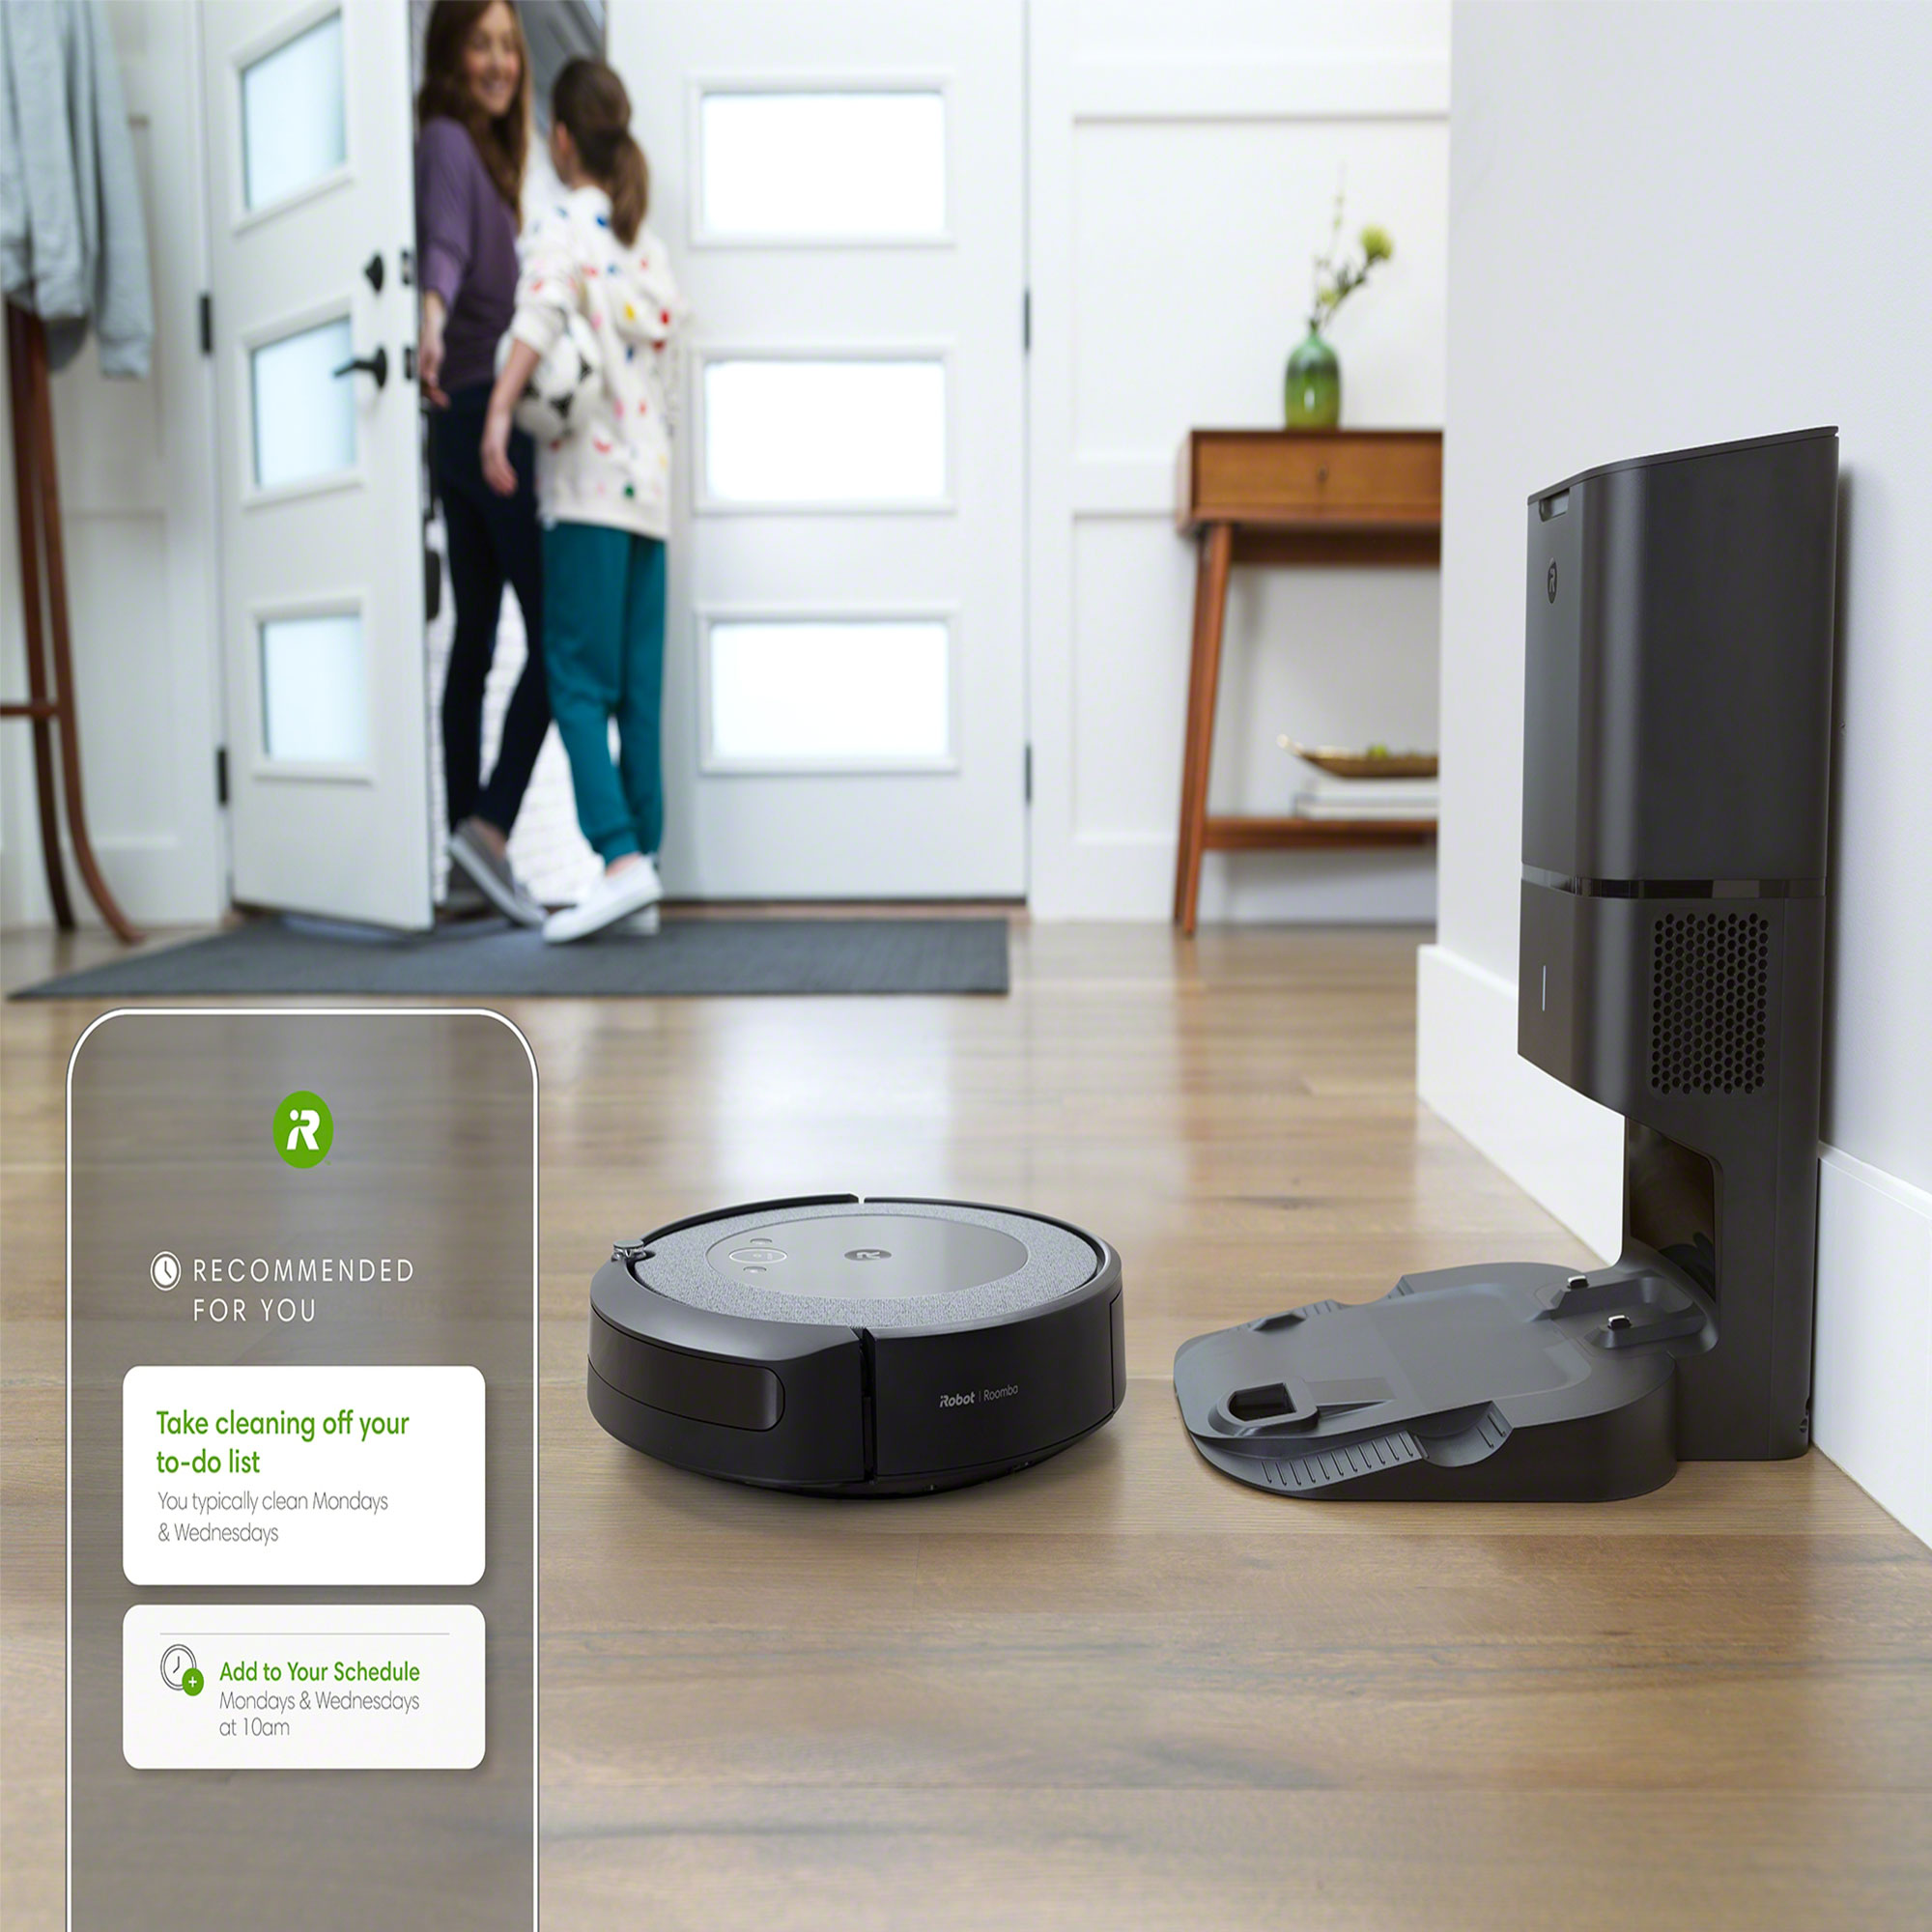 iRobot brings Siri support to its robot vacuums, updates Roomba j7